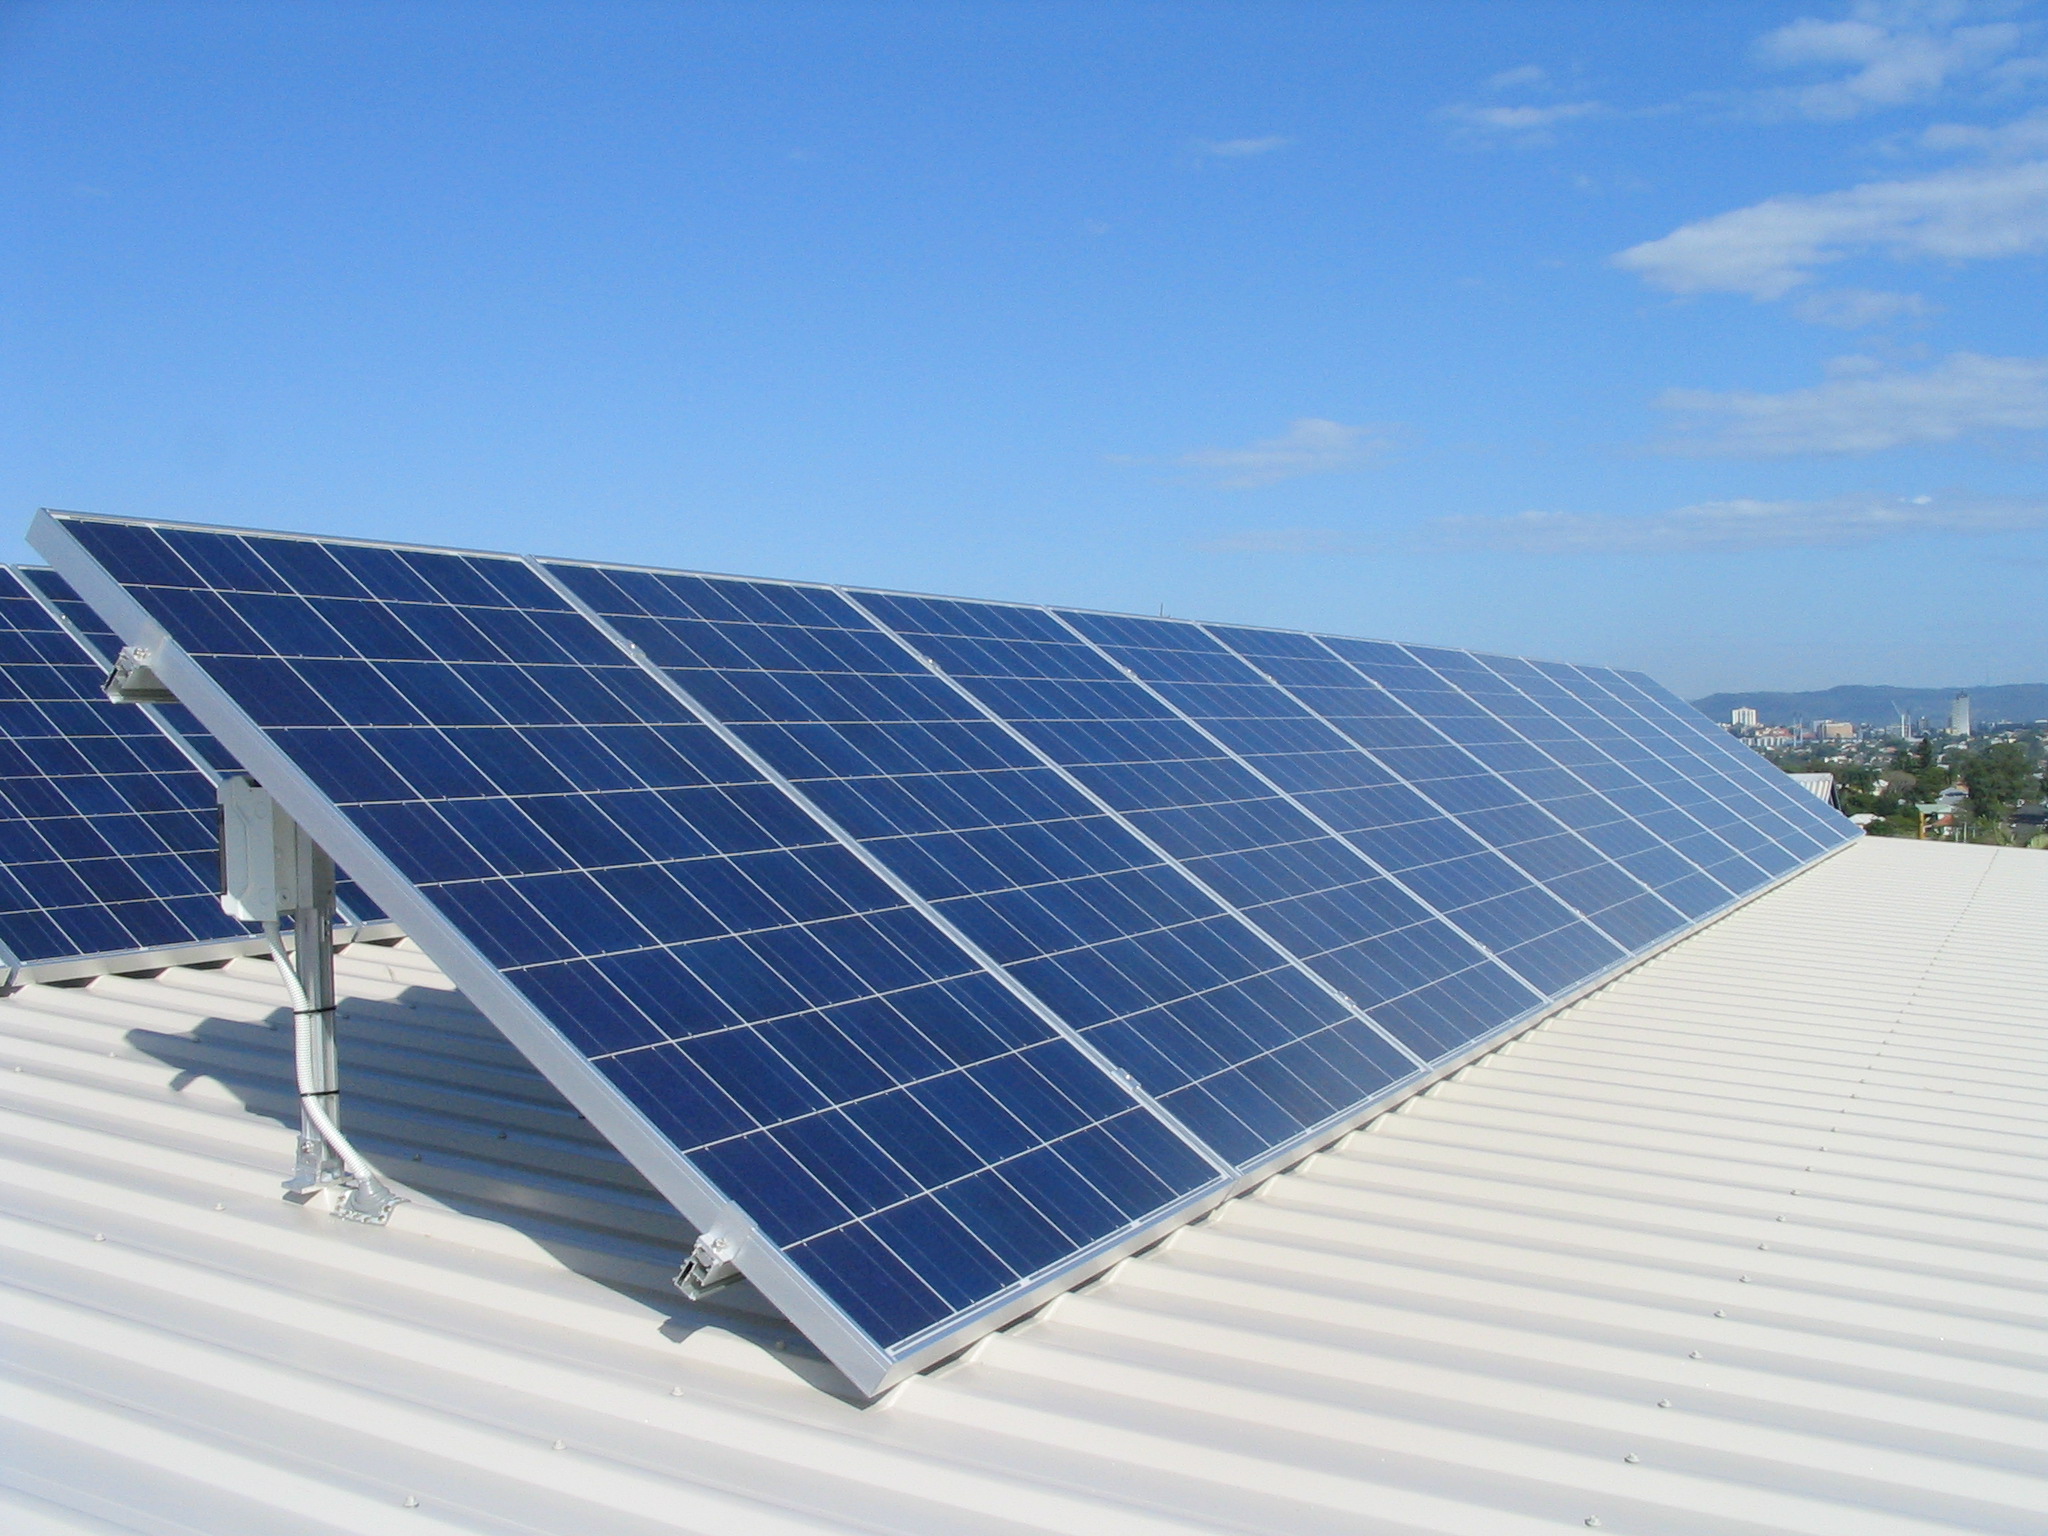 Solar panel installation examples from Excluss